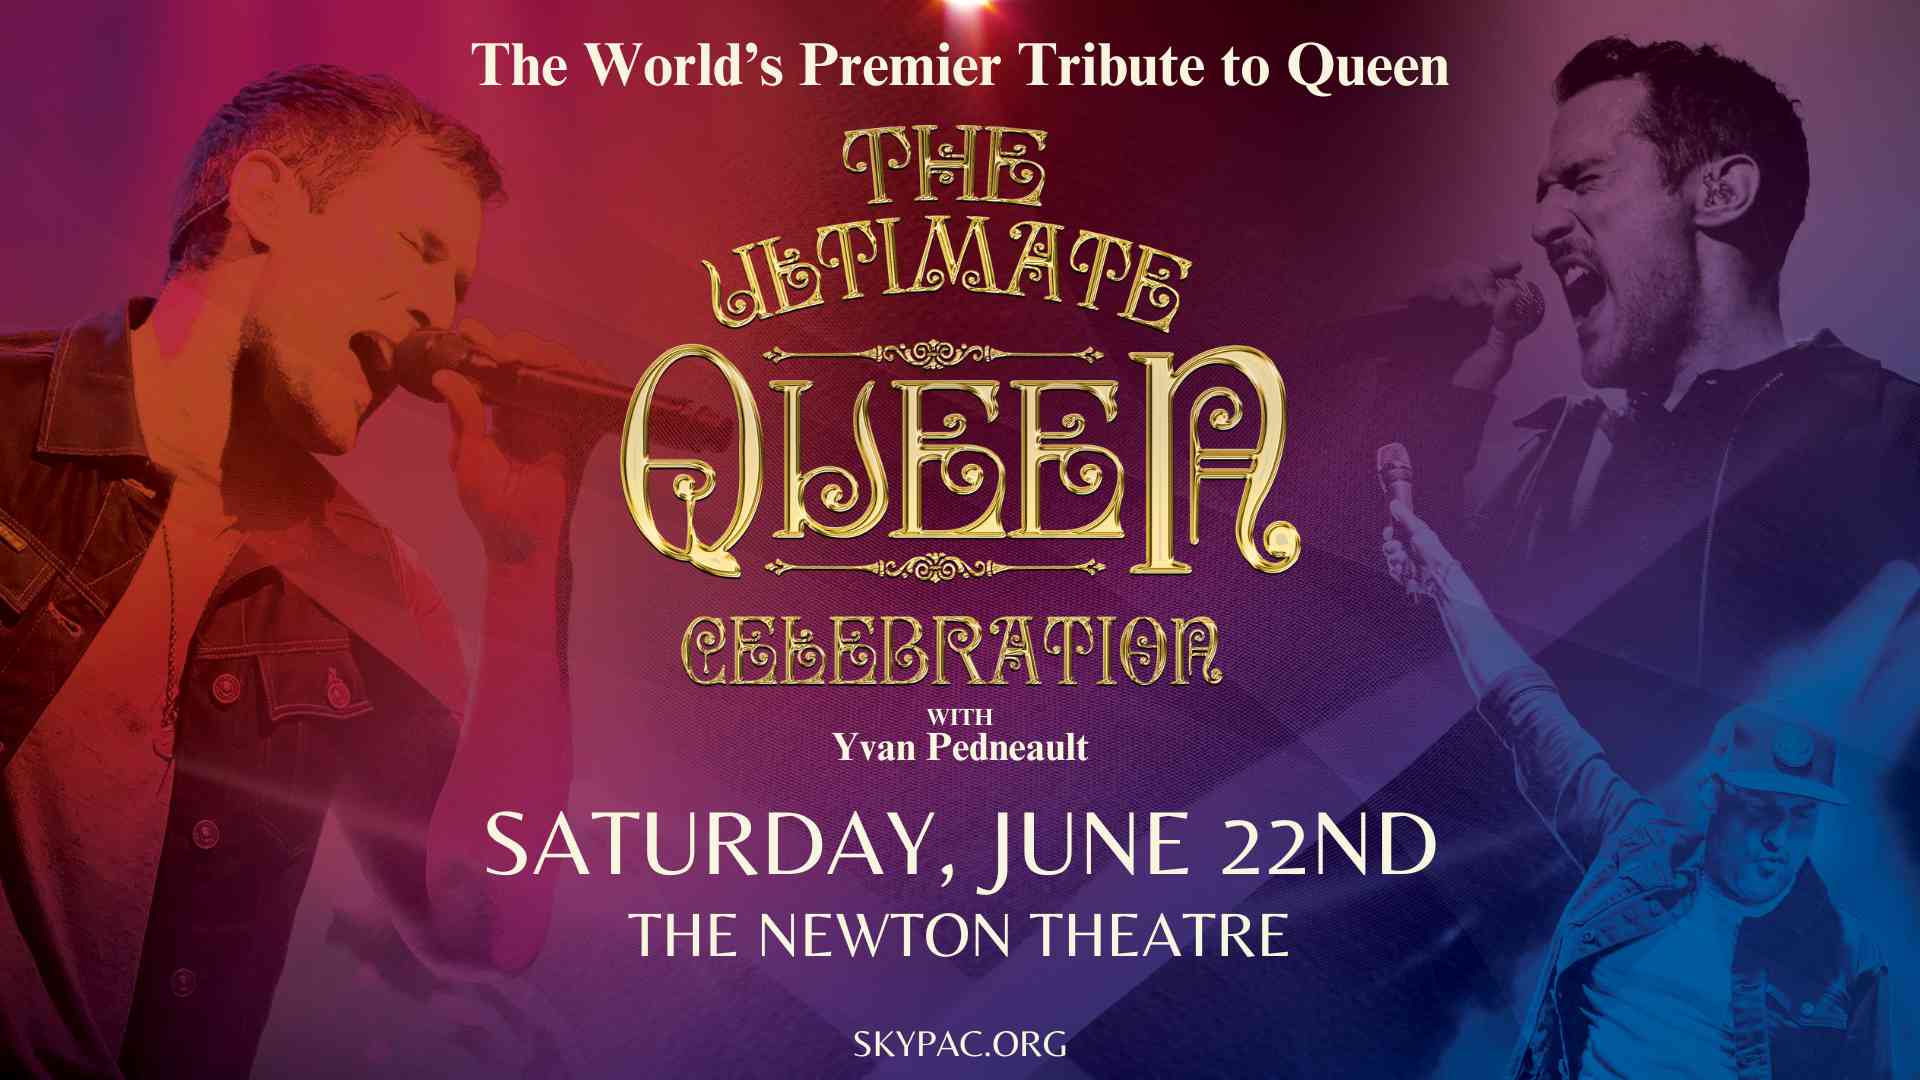 The Ultimate Queen Celebration is coming to The Newton Theatre on Saturday, June 22nd.